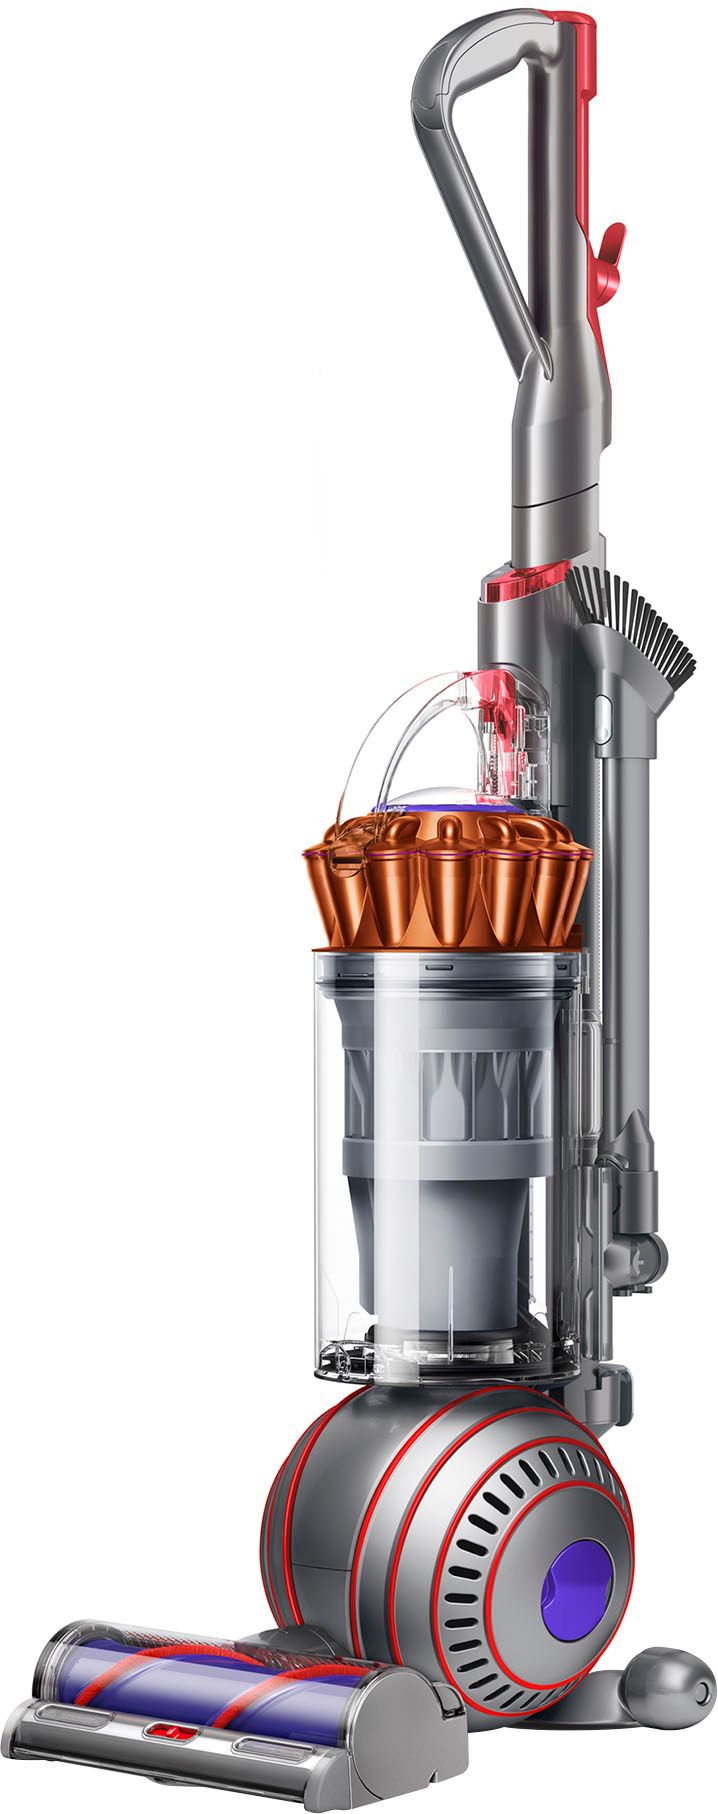 Dyson Ball Animal 3 Extra Upright Vacuum with 5 accessories Copper/Silver 394515-01 - Best Buy | Best Buy U.S.